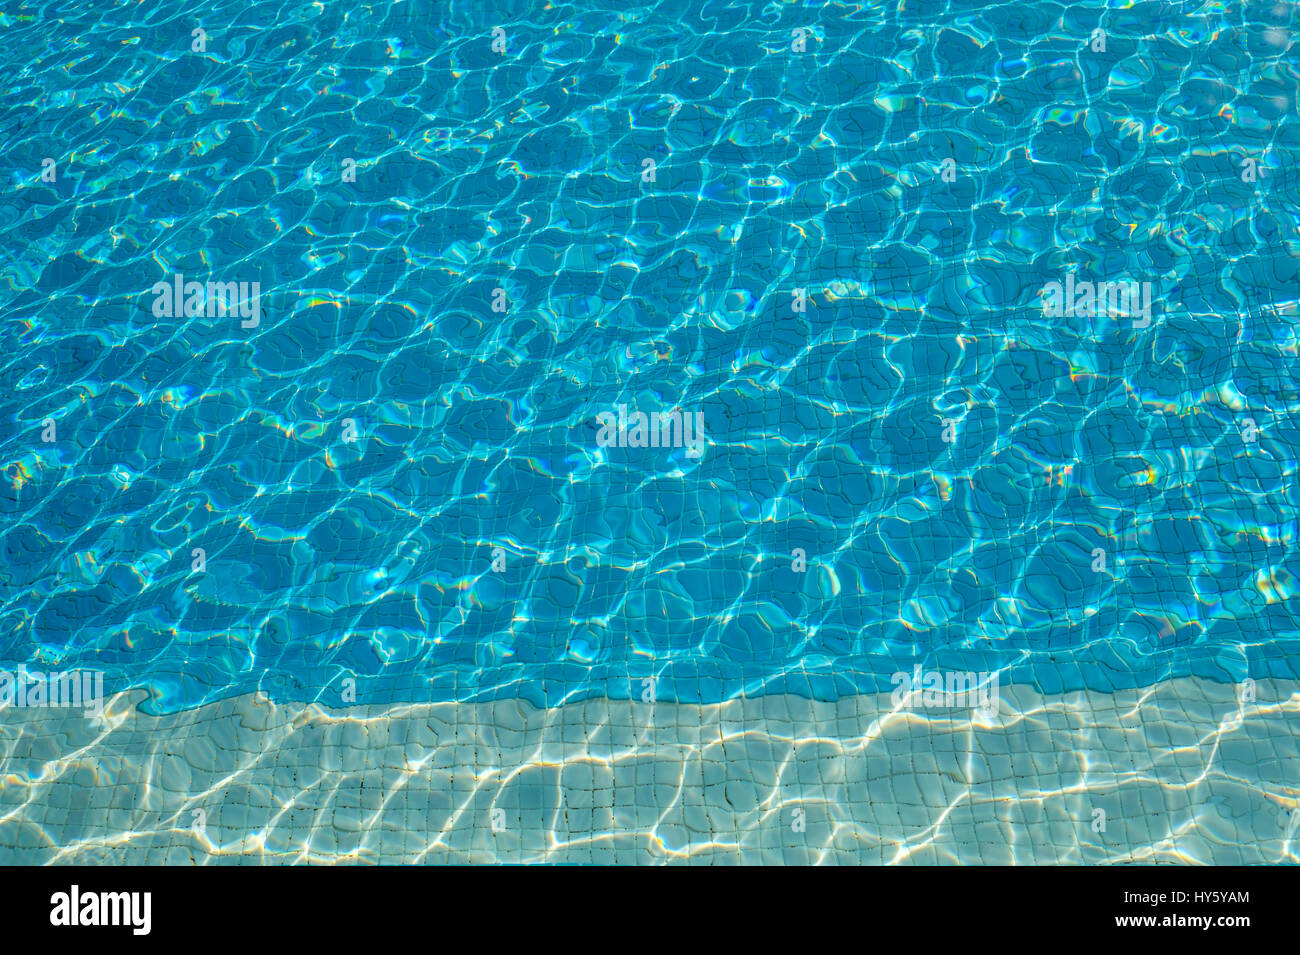 Sun shining on a hotel swimming pool creates ripples and shapes of bright turquoise blue ideal for background with copy space Stock Photo